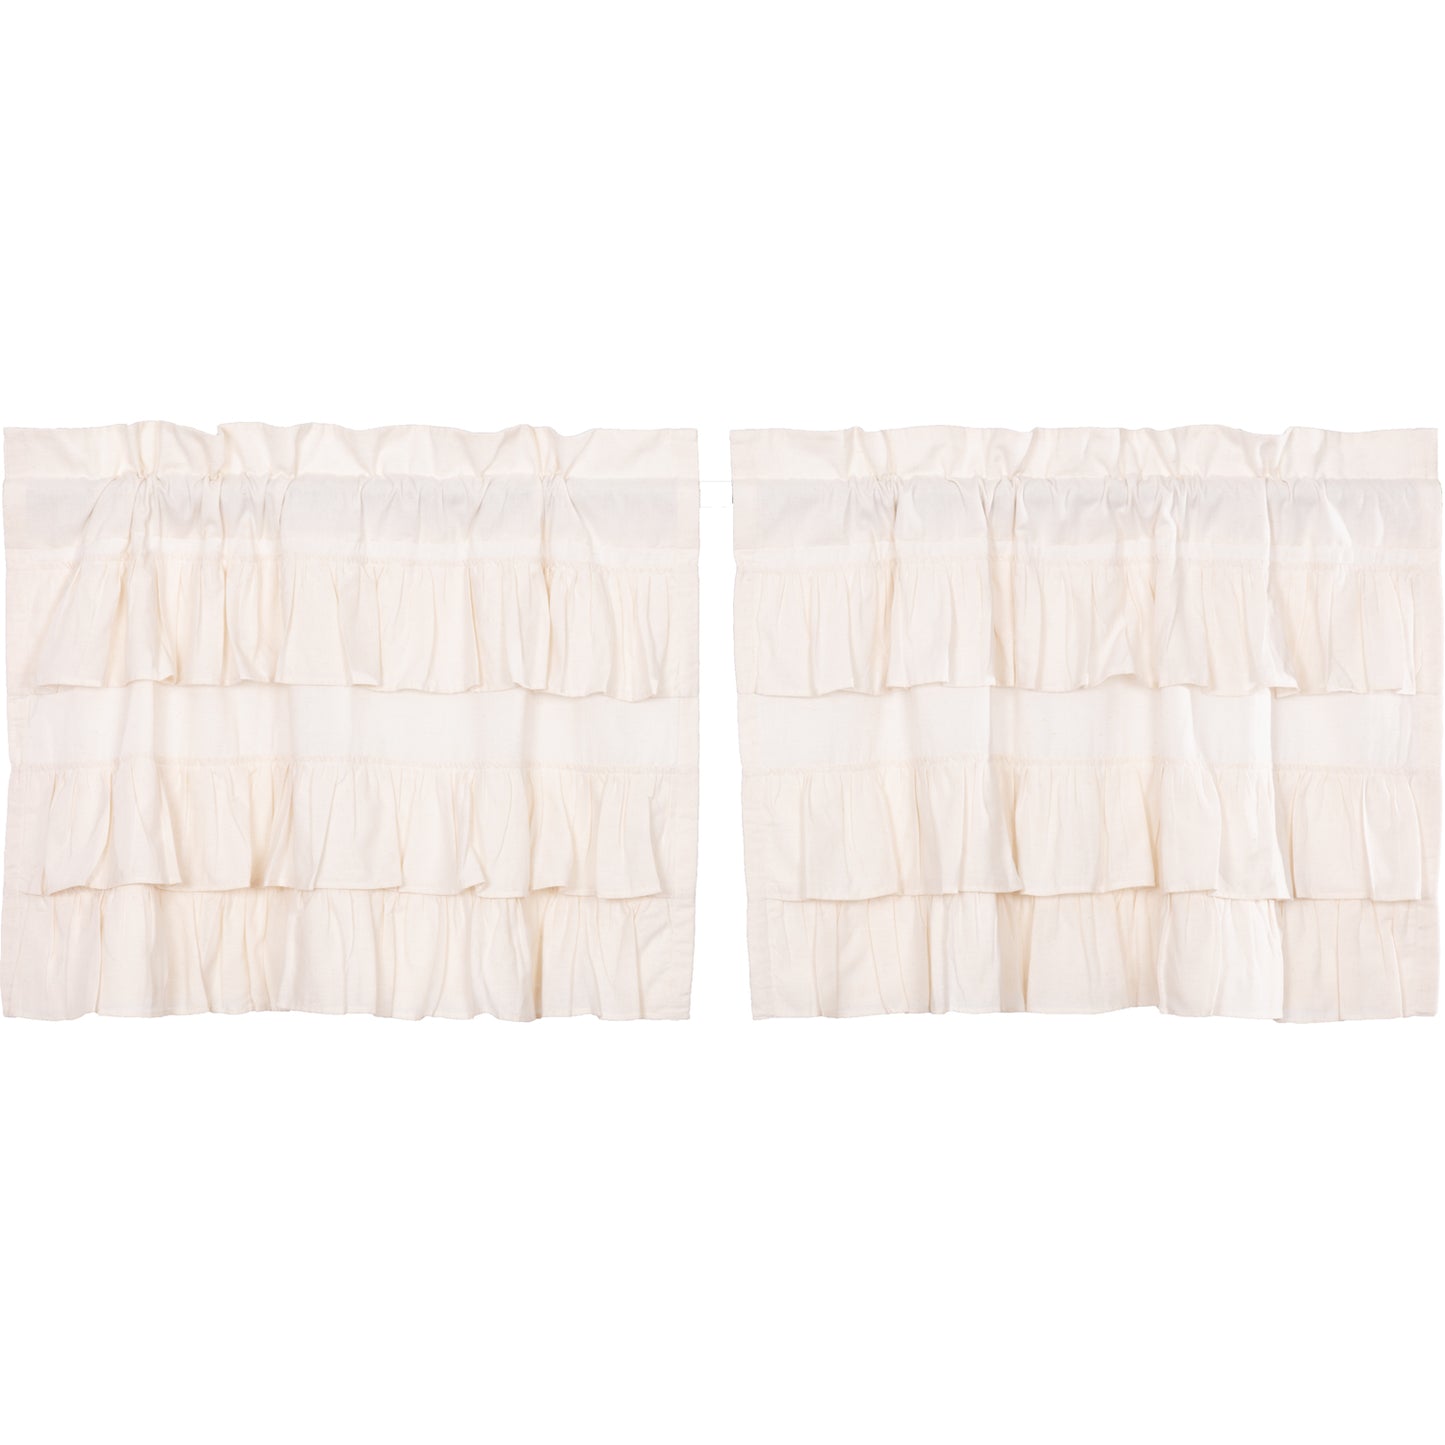 51981-Simple-Life-Flax-Antique-White-Ruffled-Tier-Set-of-2-L24xW36-image-6